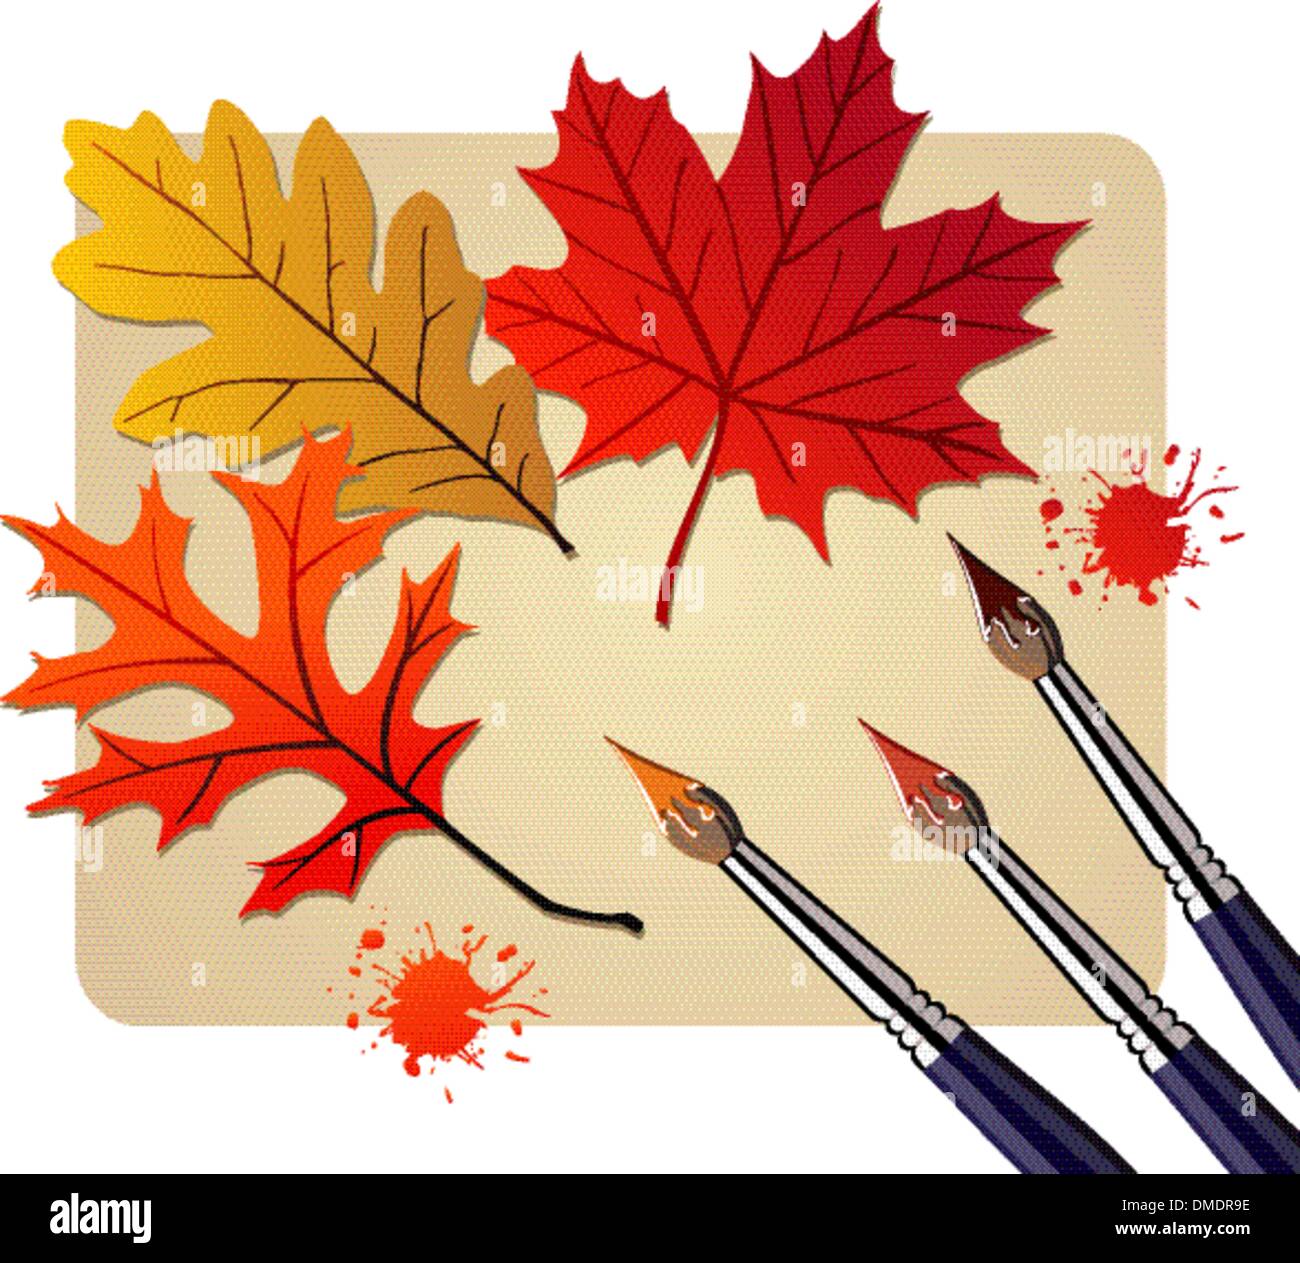 Brushes with autumn colors Stock Vector